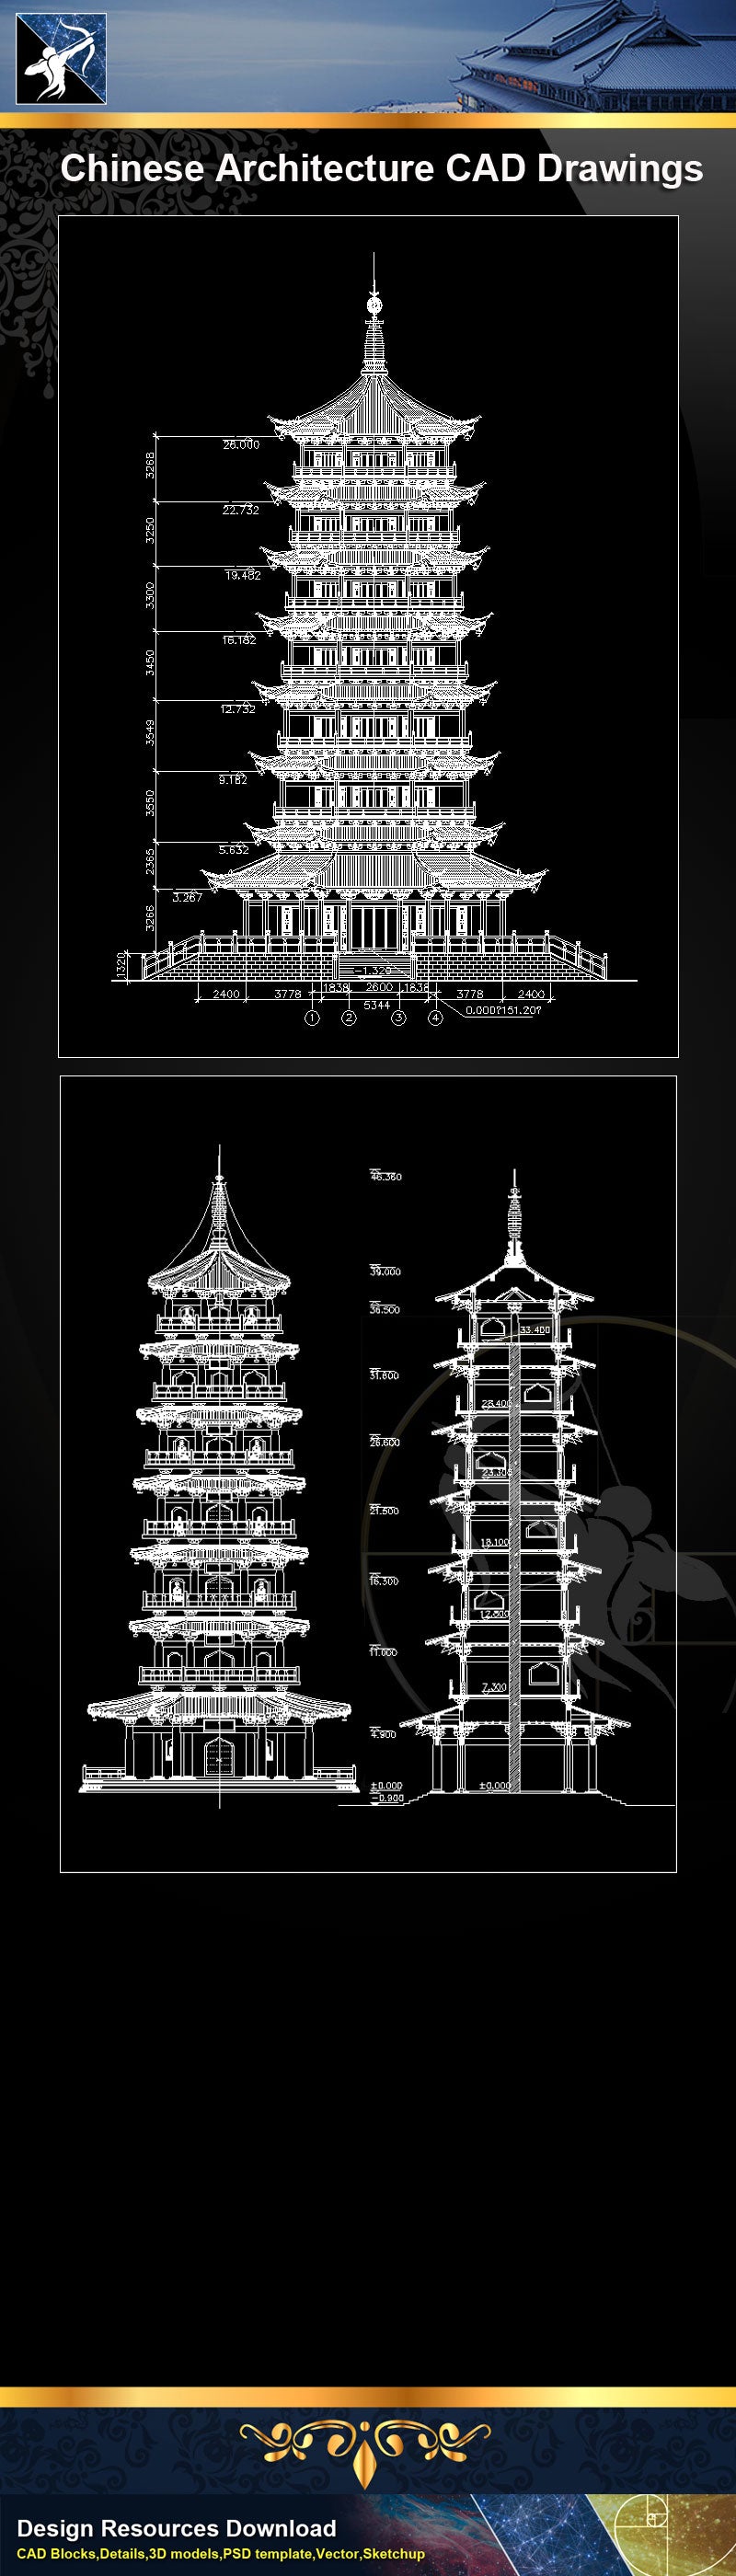 Chinese Architecture Drawing|Chinese Temple|Chinese Tower|Chinese building elevation|Chinese Traditional Architecture CAD Drawings